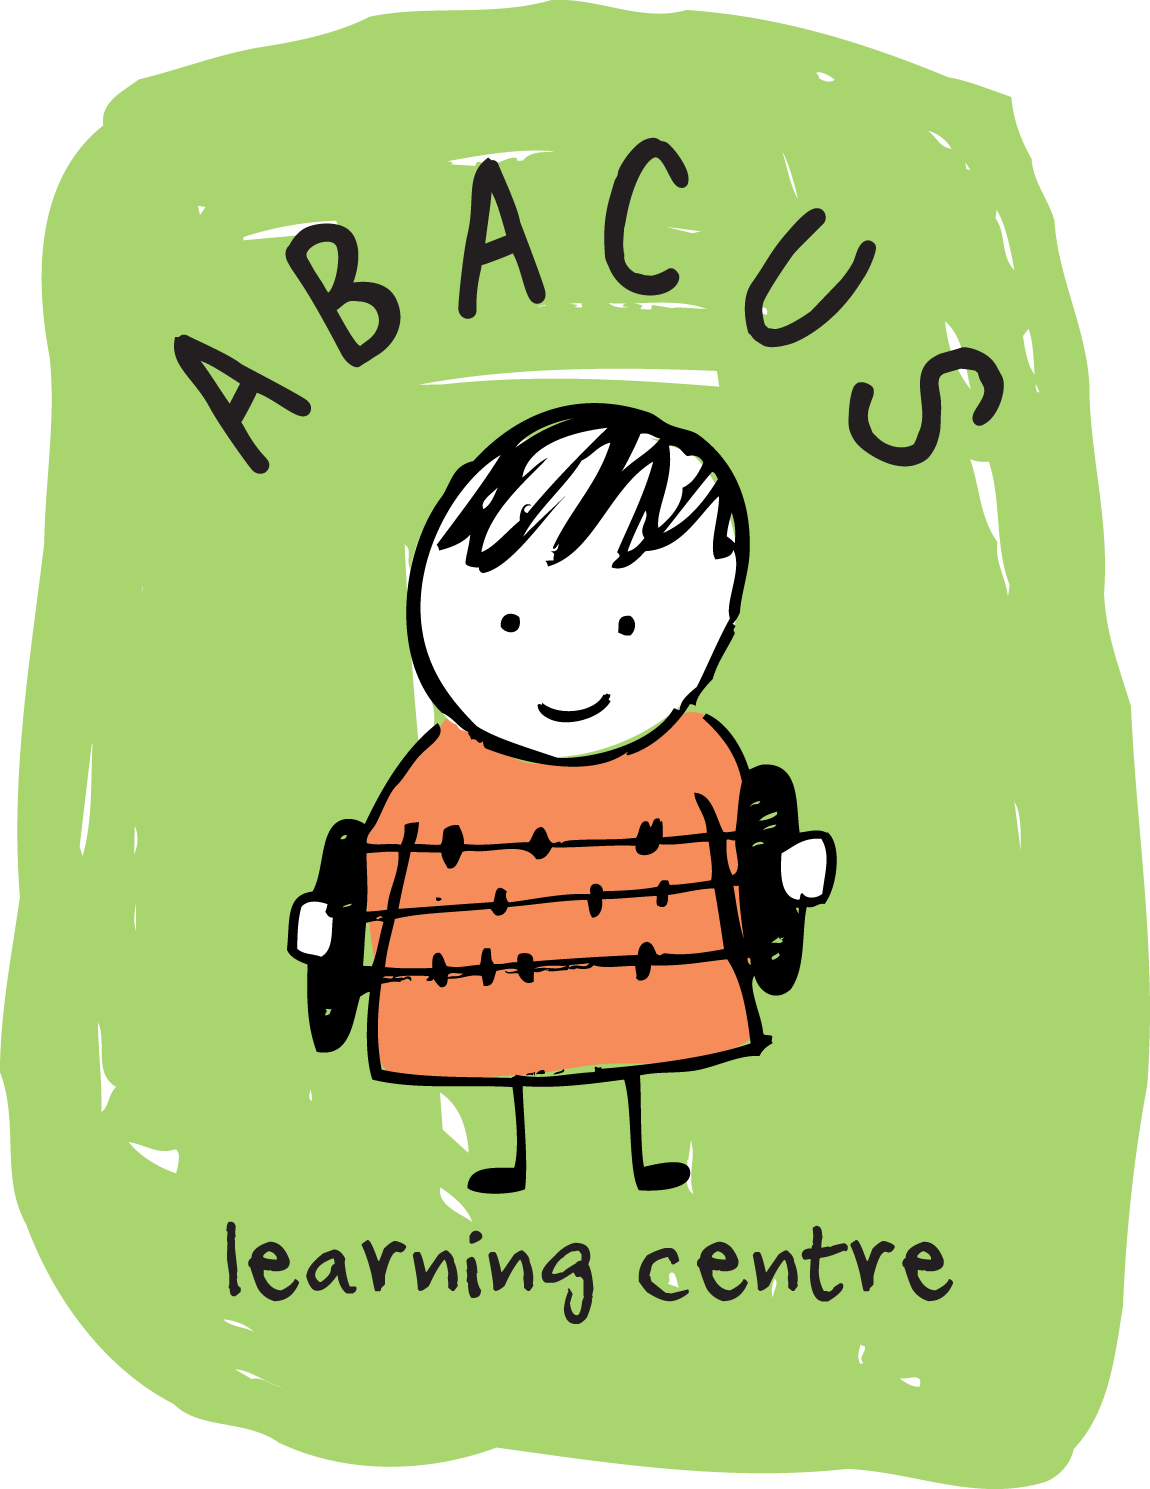 abacus early learning center indiana